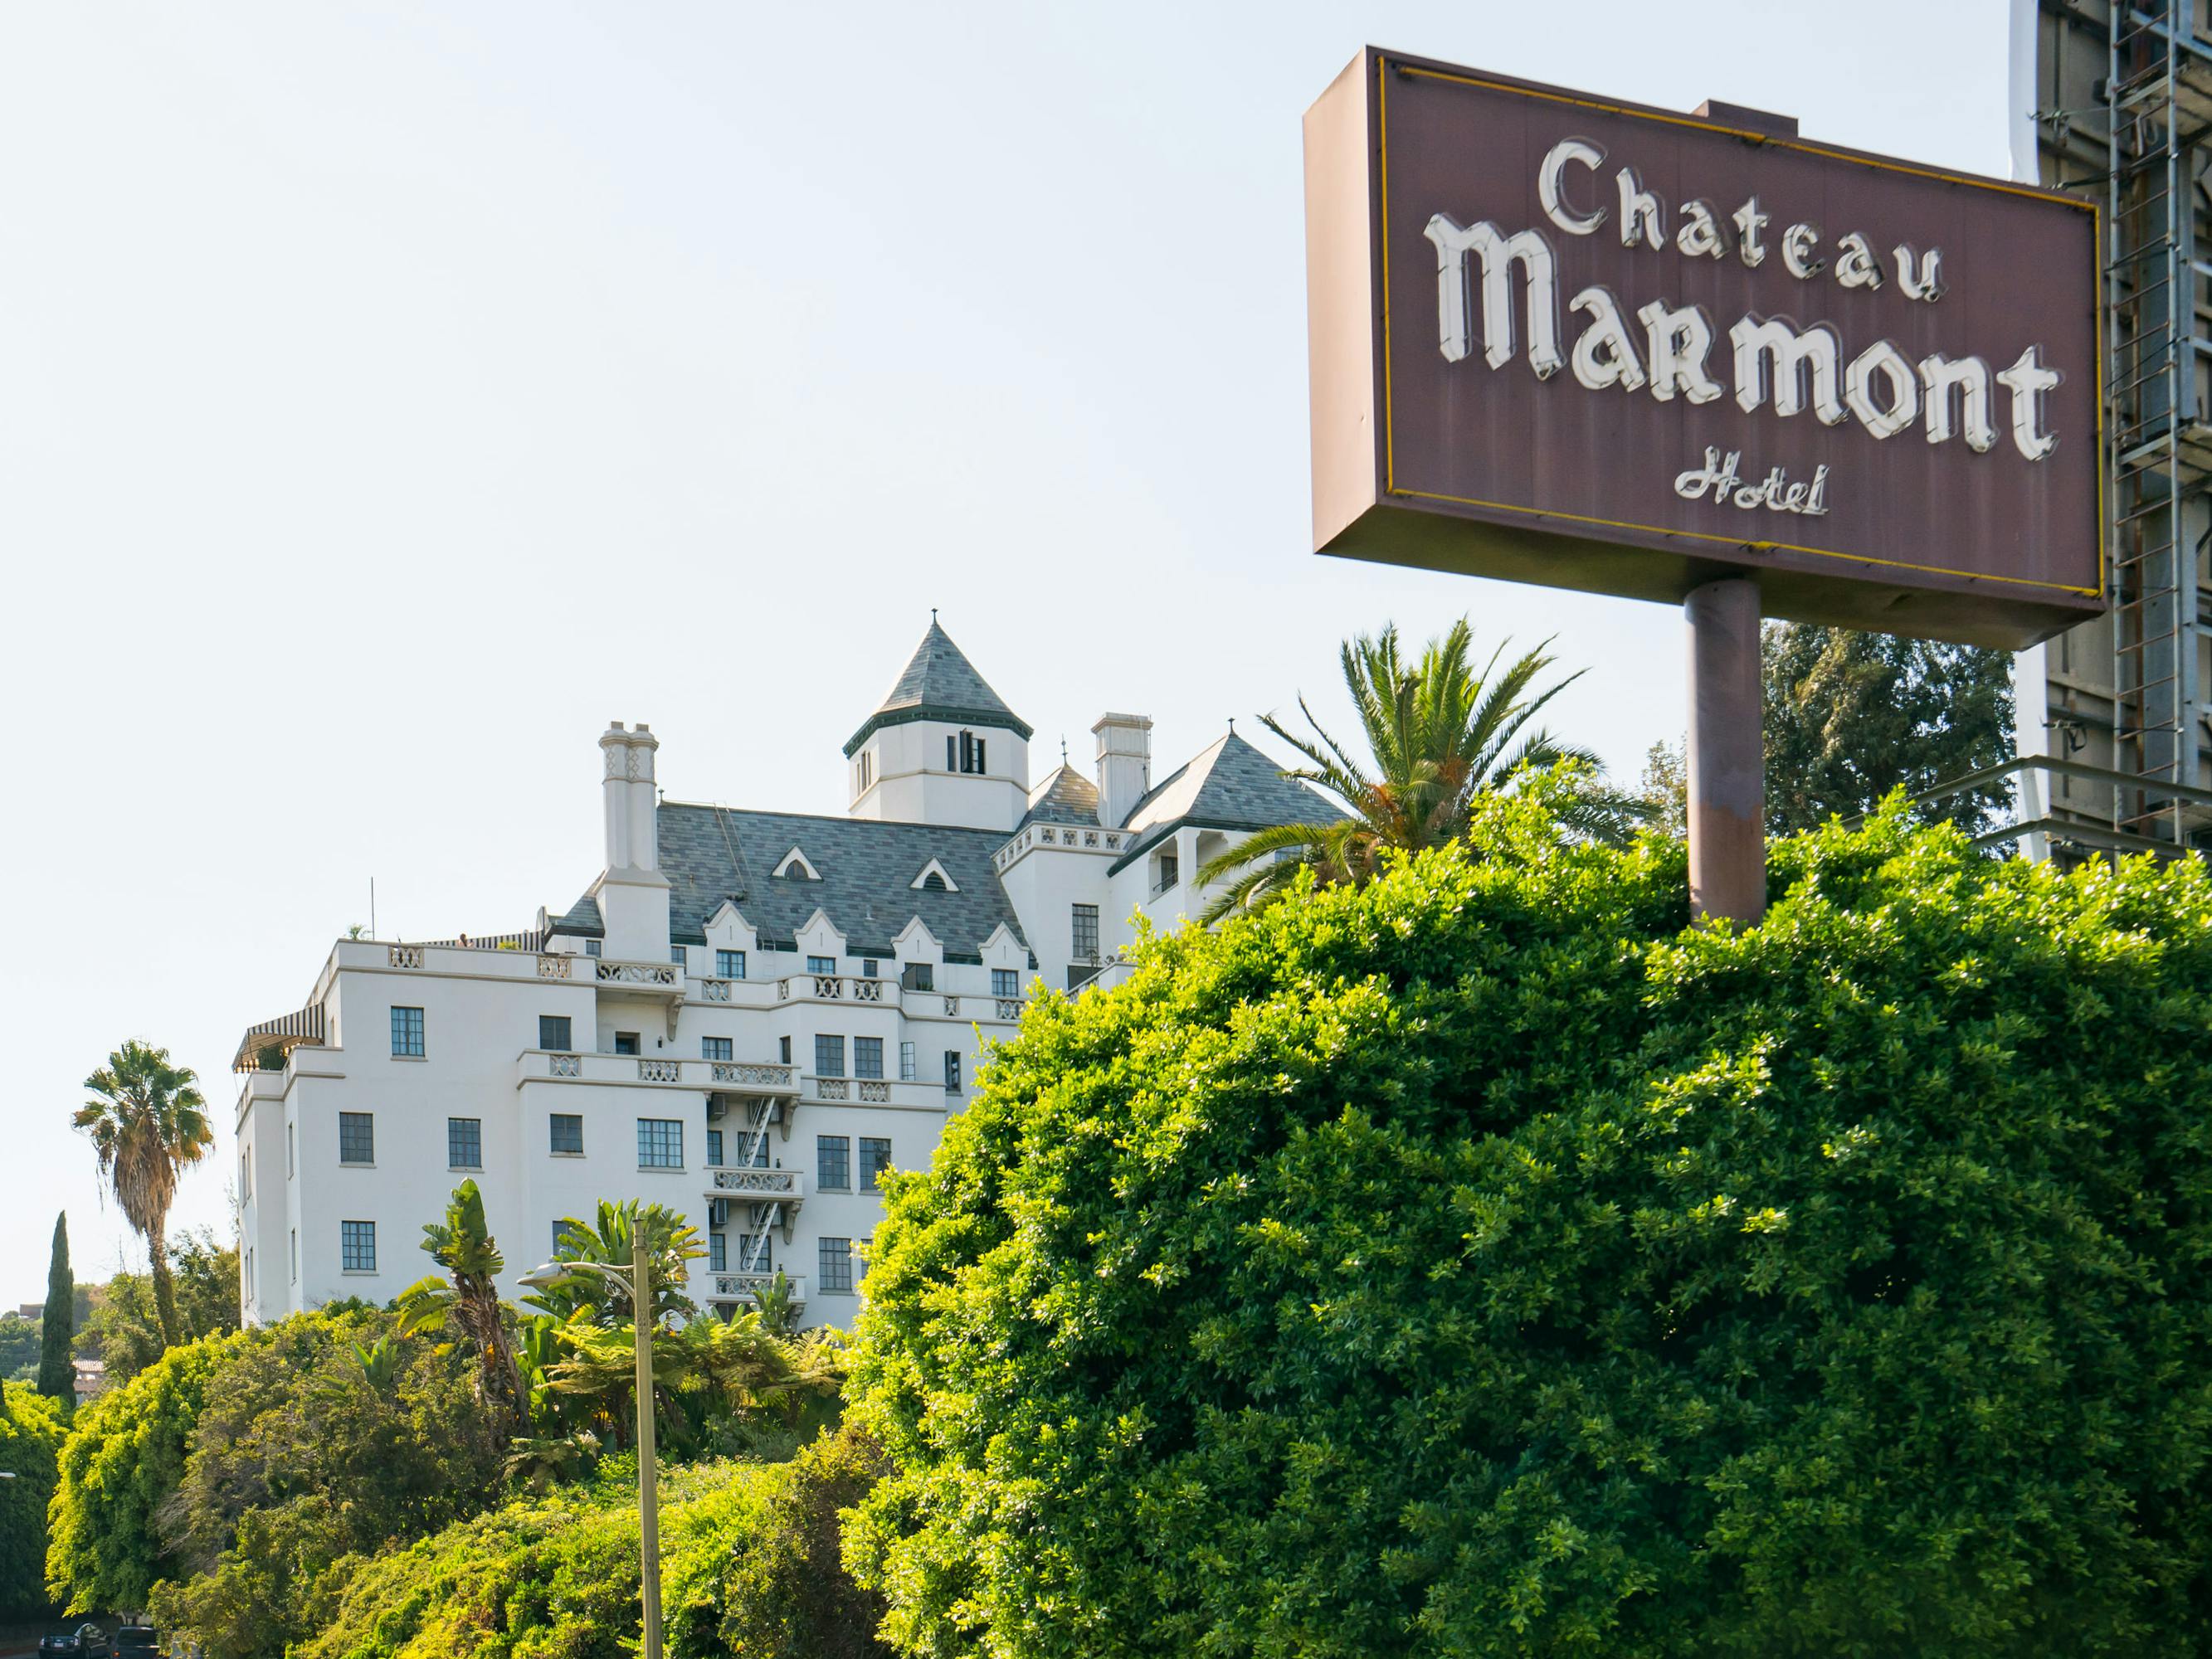 Chateau Marmont, as announced by a brown sign with white lettering. The hotel is castle like, white with gray roofing. 